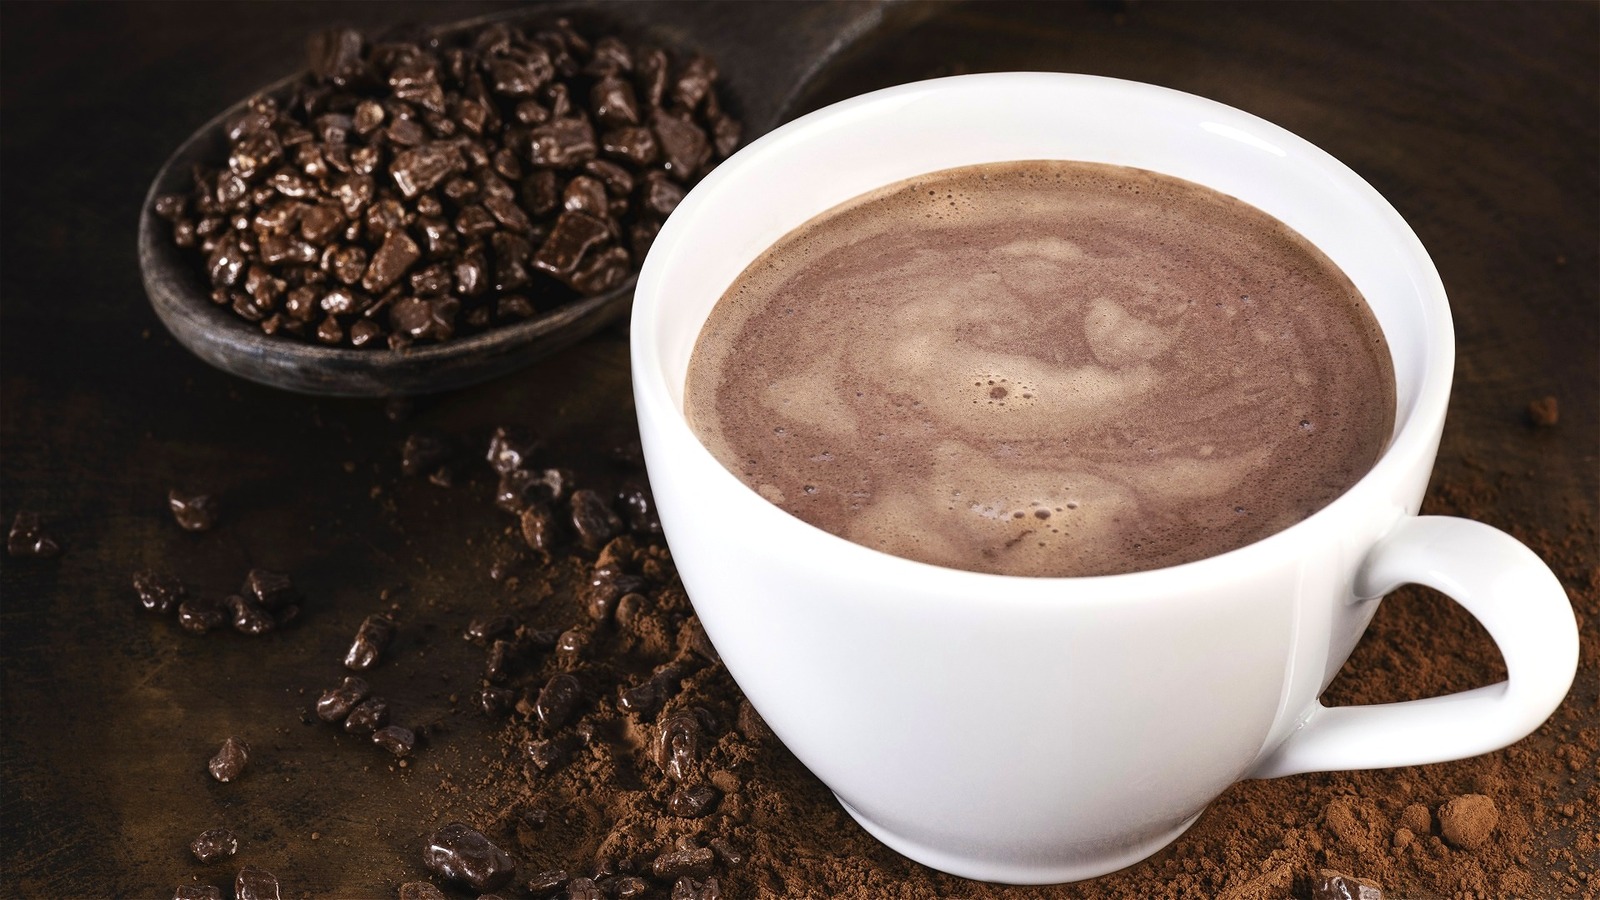 Swap Out Flavored Creamer And Just Add Chocolate Milk To Your Coffee